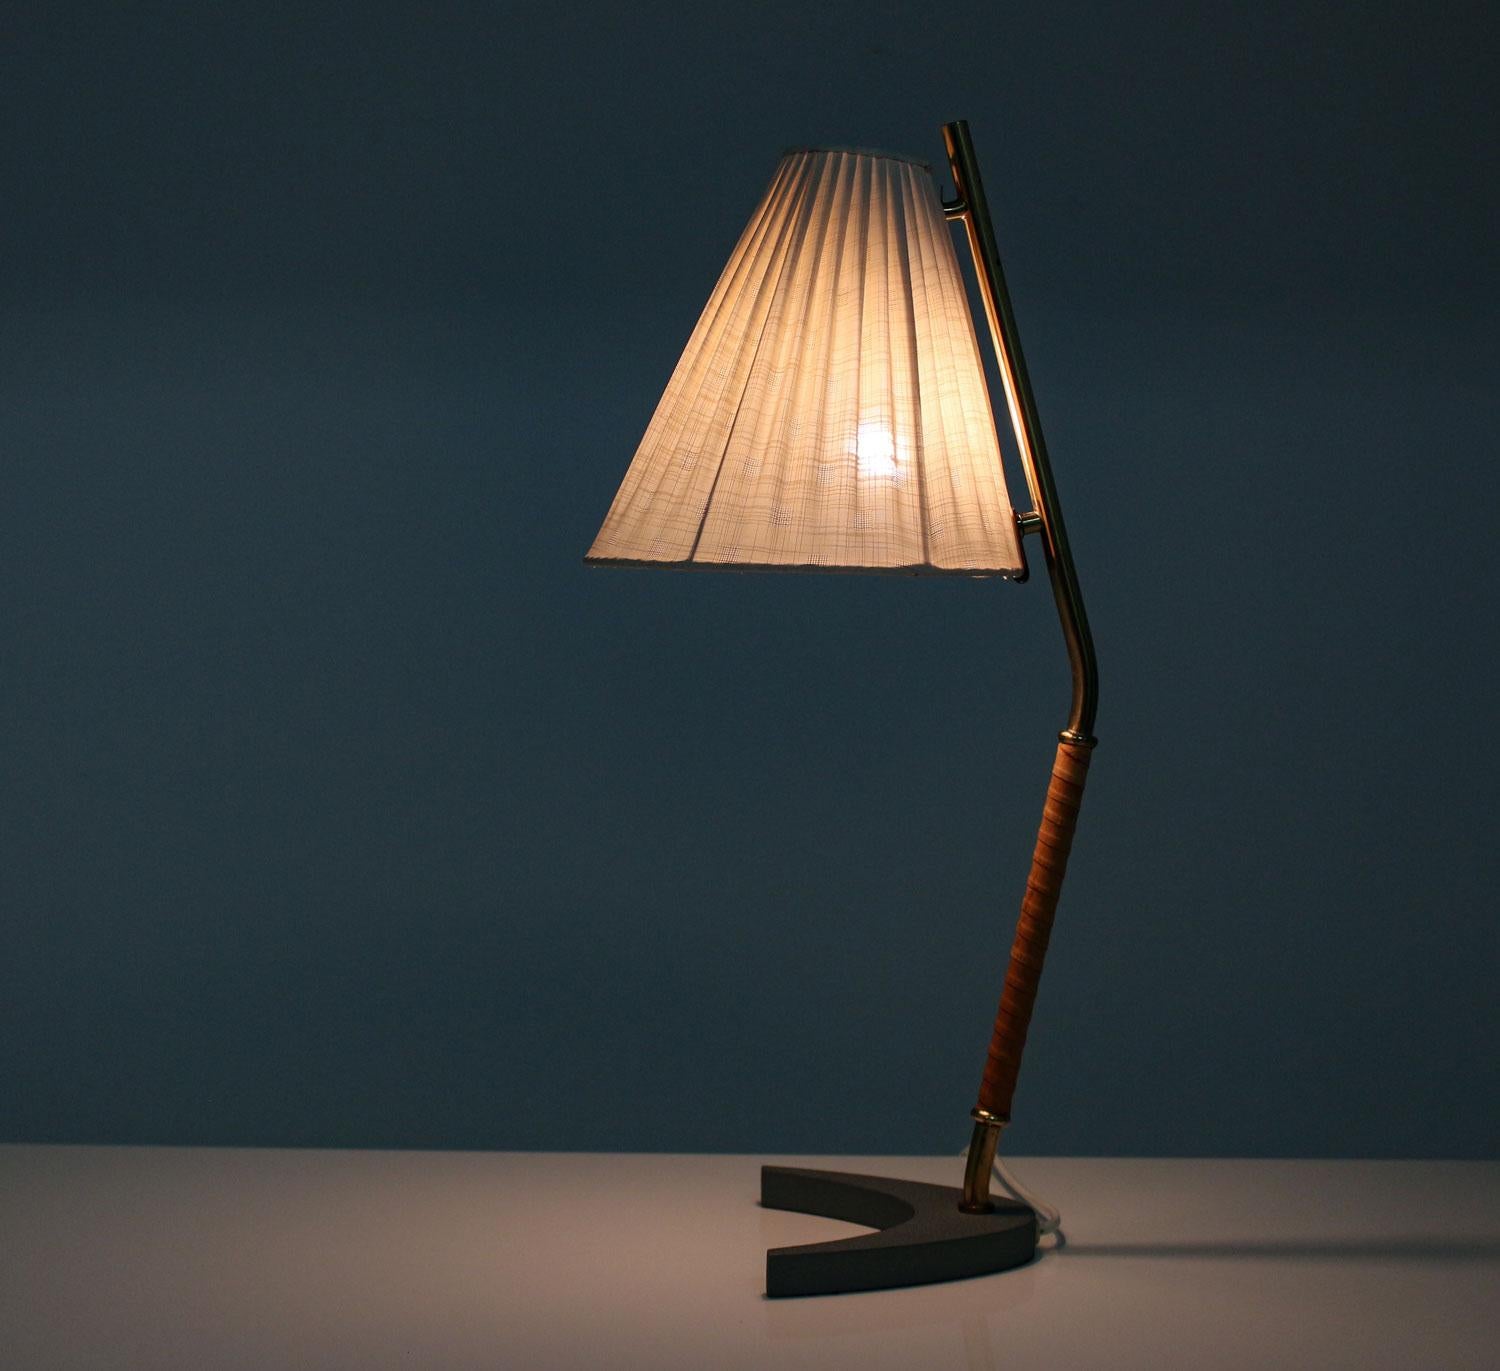 A desk lamp by Swedish manufacturer Arvid Böhlmarks Lampfabrik, model 15616.
This rare table lamp is made of brass with a leather handle, standing on a heavy V-shaped metal vcfrv foot. The shade is attached to the body with a slight distance to the